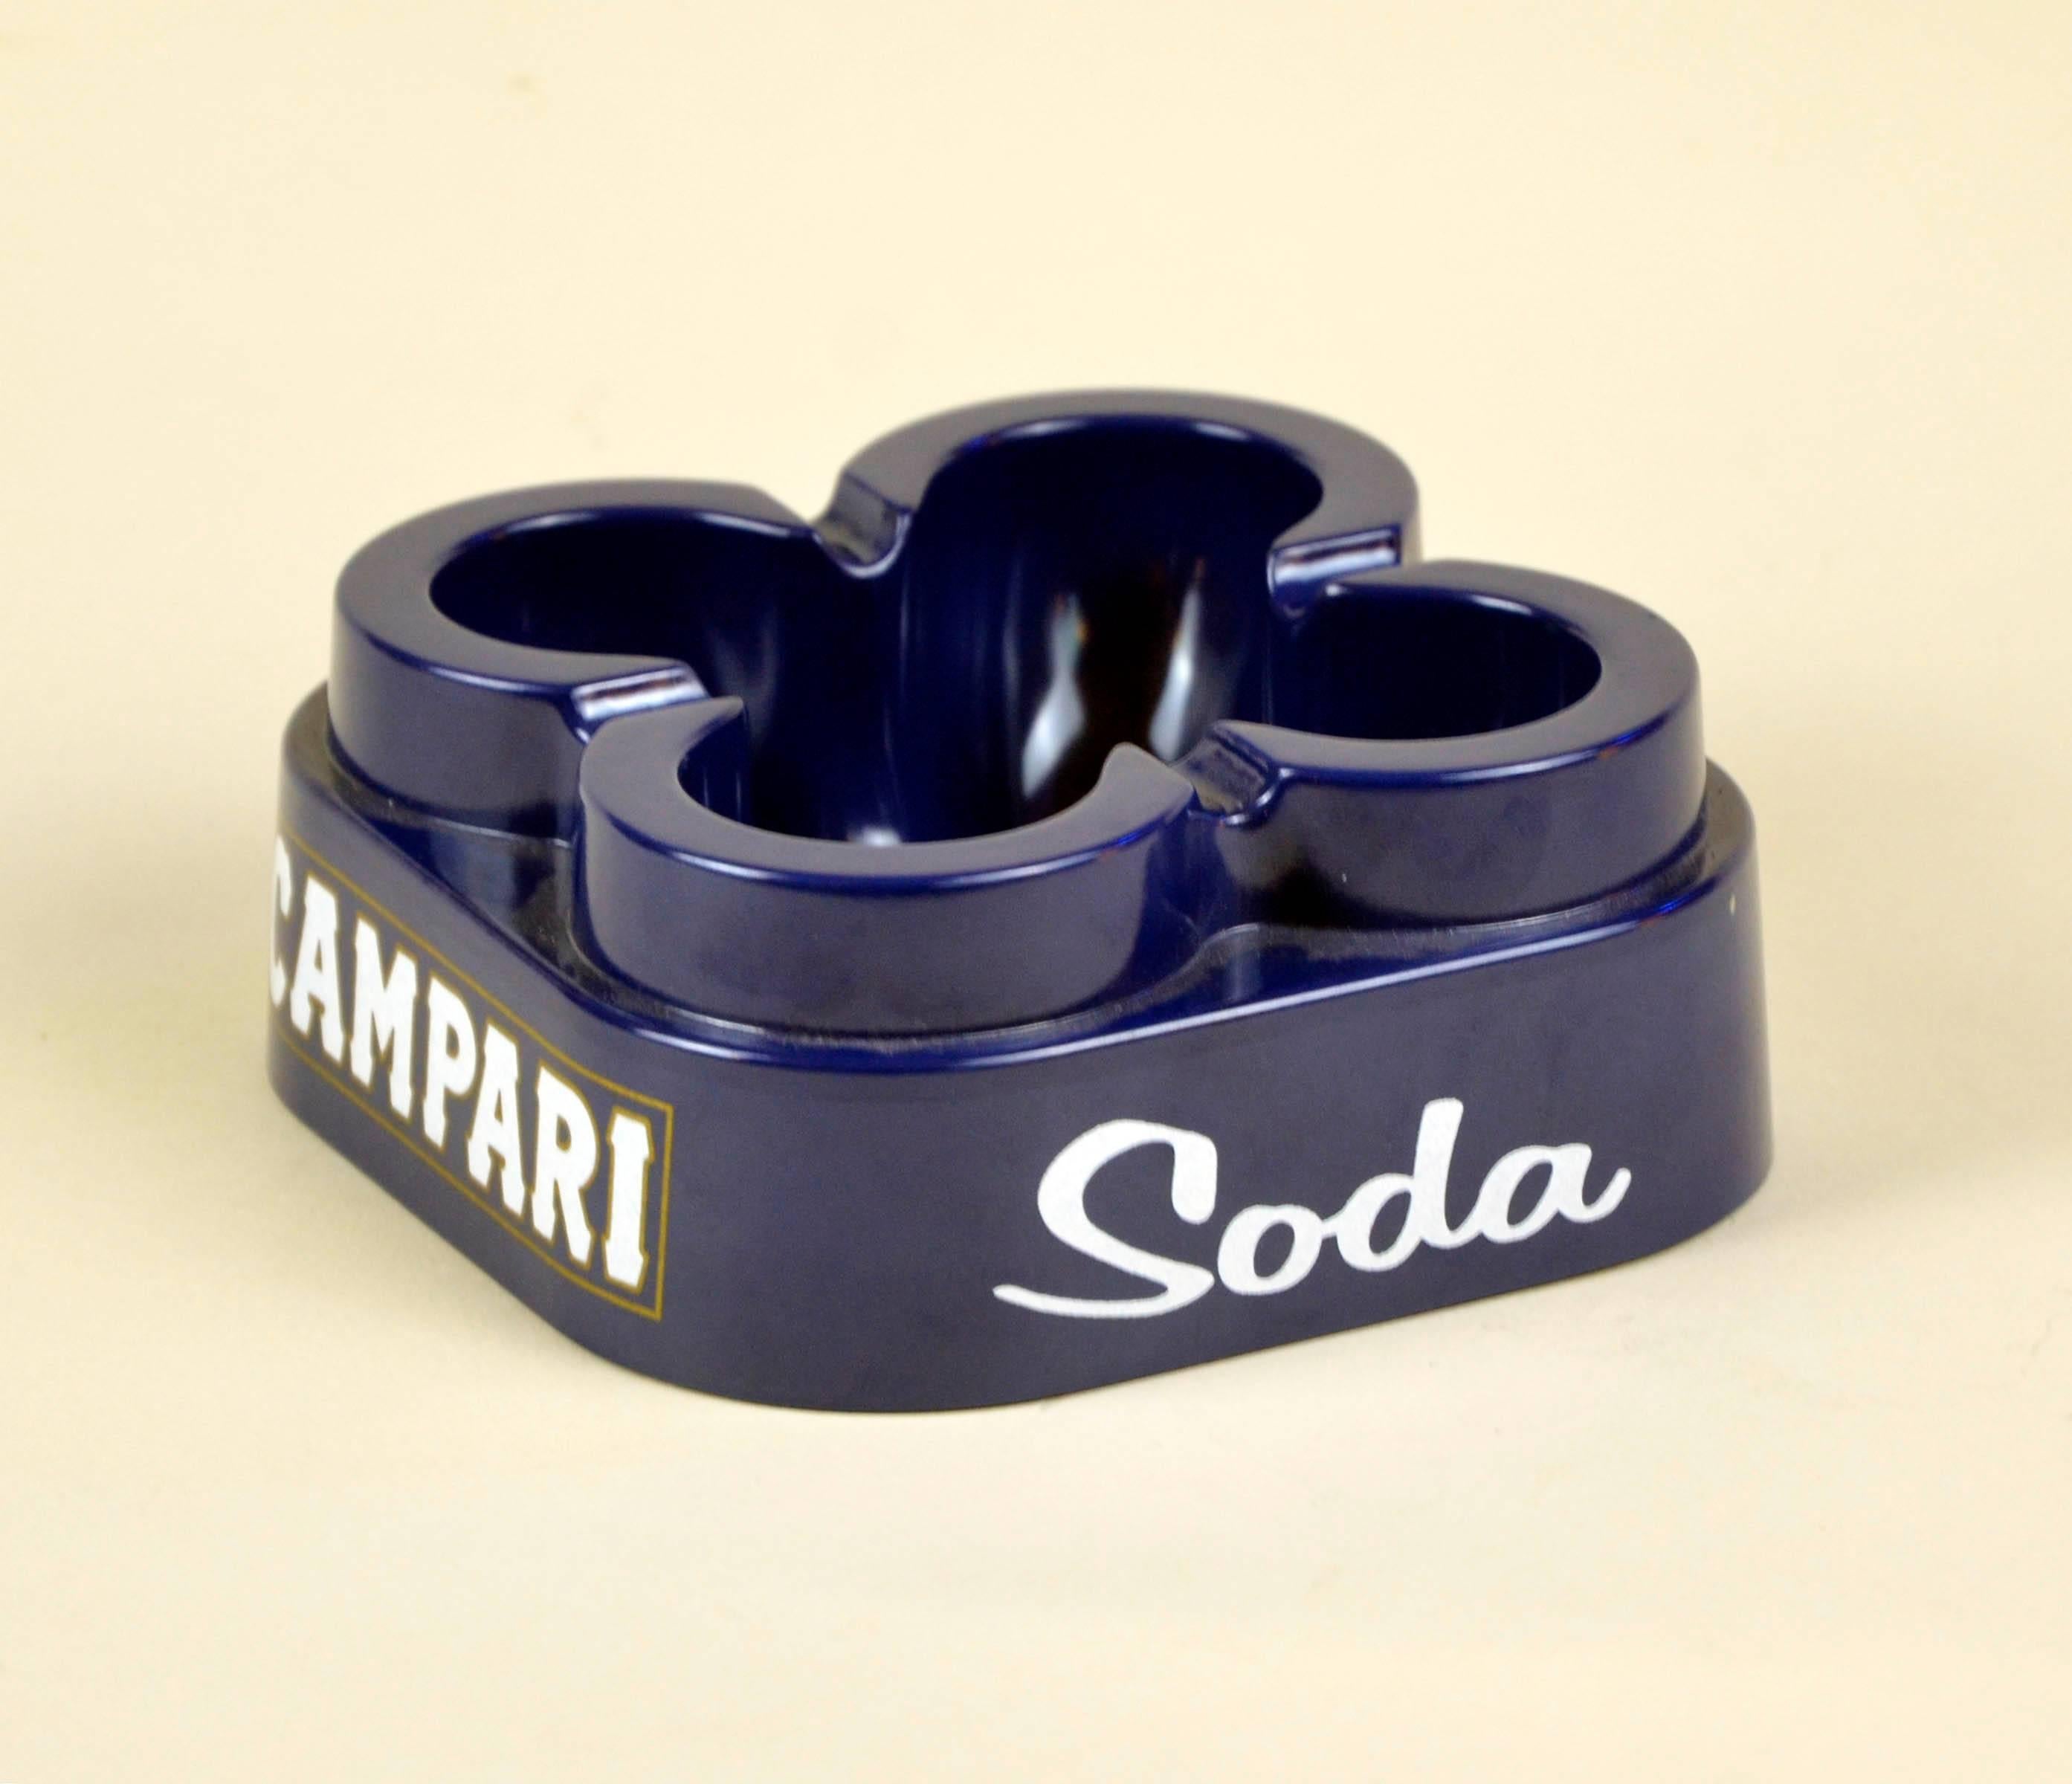 Original Campari Soda ashtray in blue rigid plastic designed by Thun Design in 1980s.

Collector's note:

Campari is an Italian alcoholic liqueur, considered an apéritif obtained from the infusion of herbs and fruit in alcohol and water. Campari